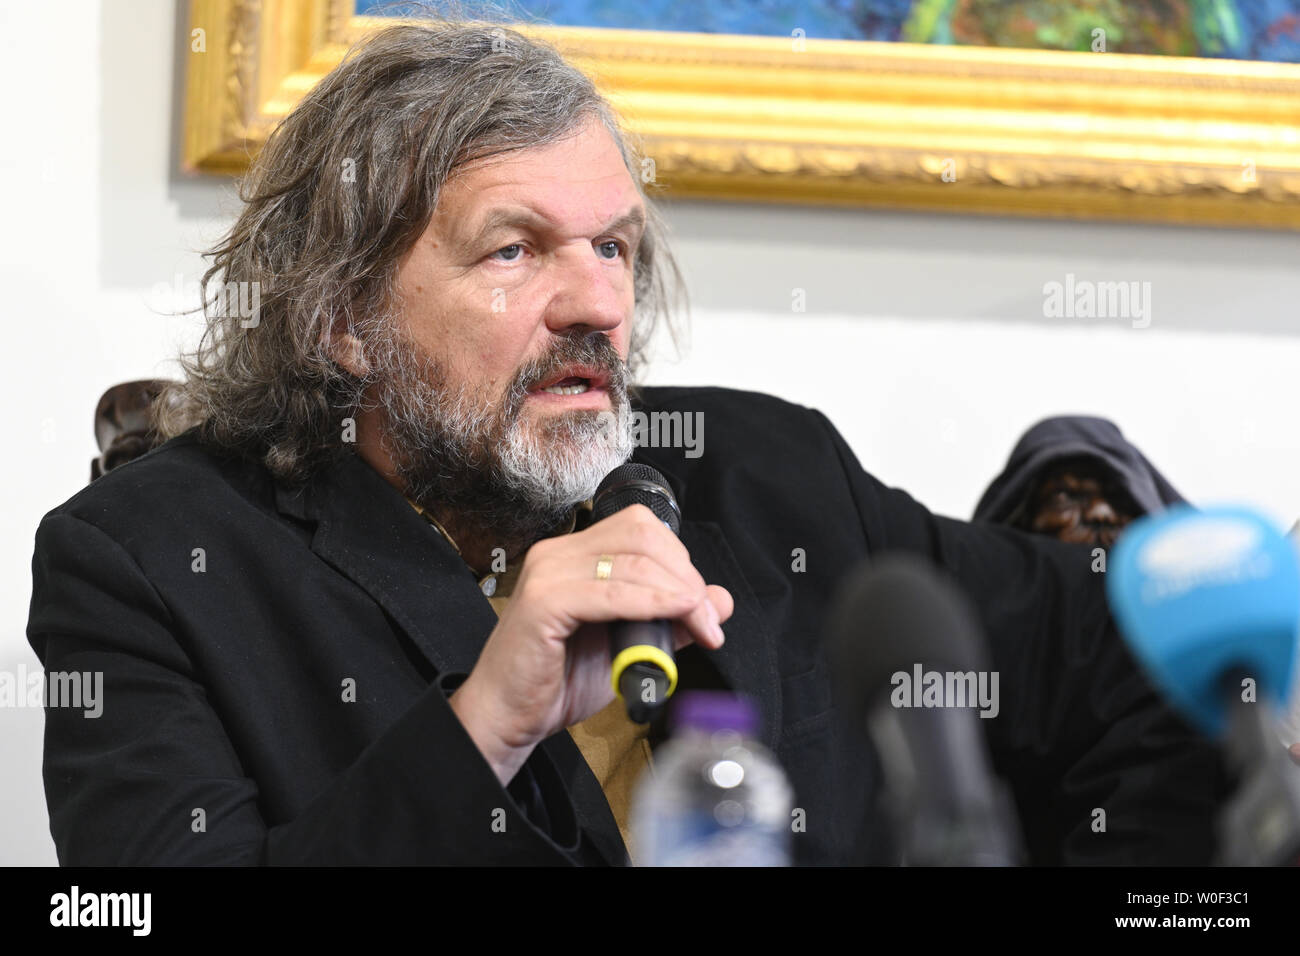 Famous musician and filmmaker Emir Kusturica at the press conference devoted to  the 'Eto Etno' - first festival of ethnic music in St. Petersburg, Russia Stock Photo